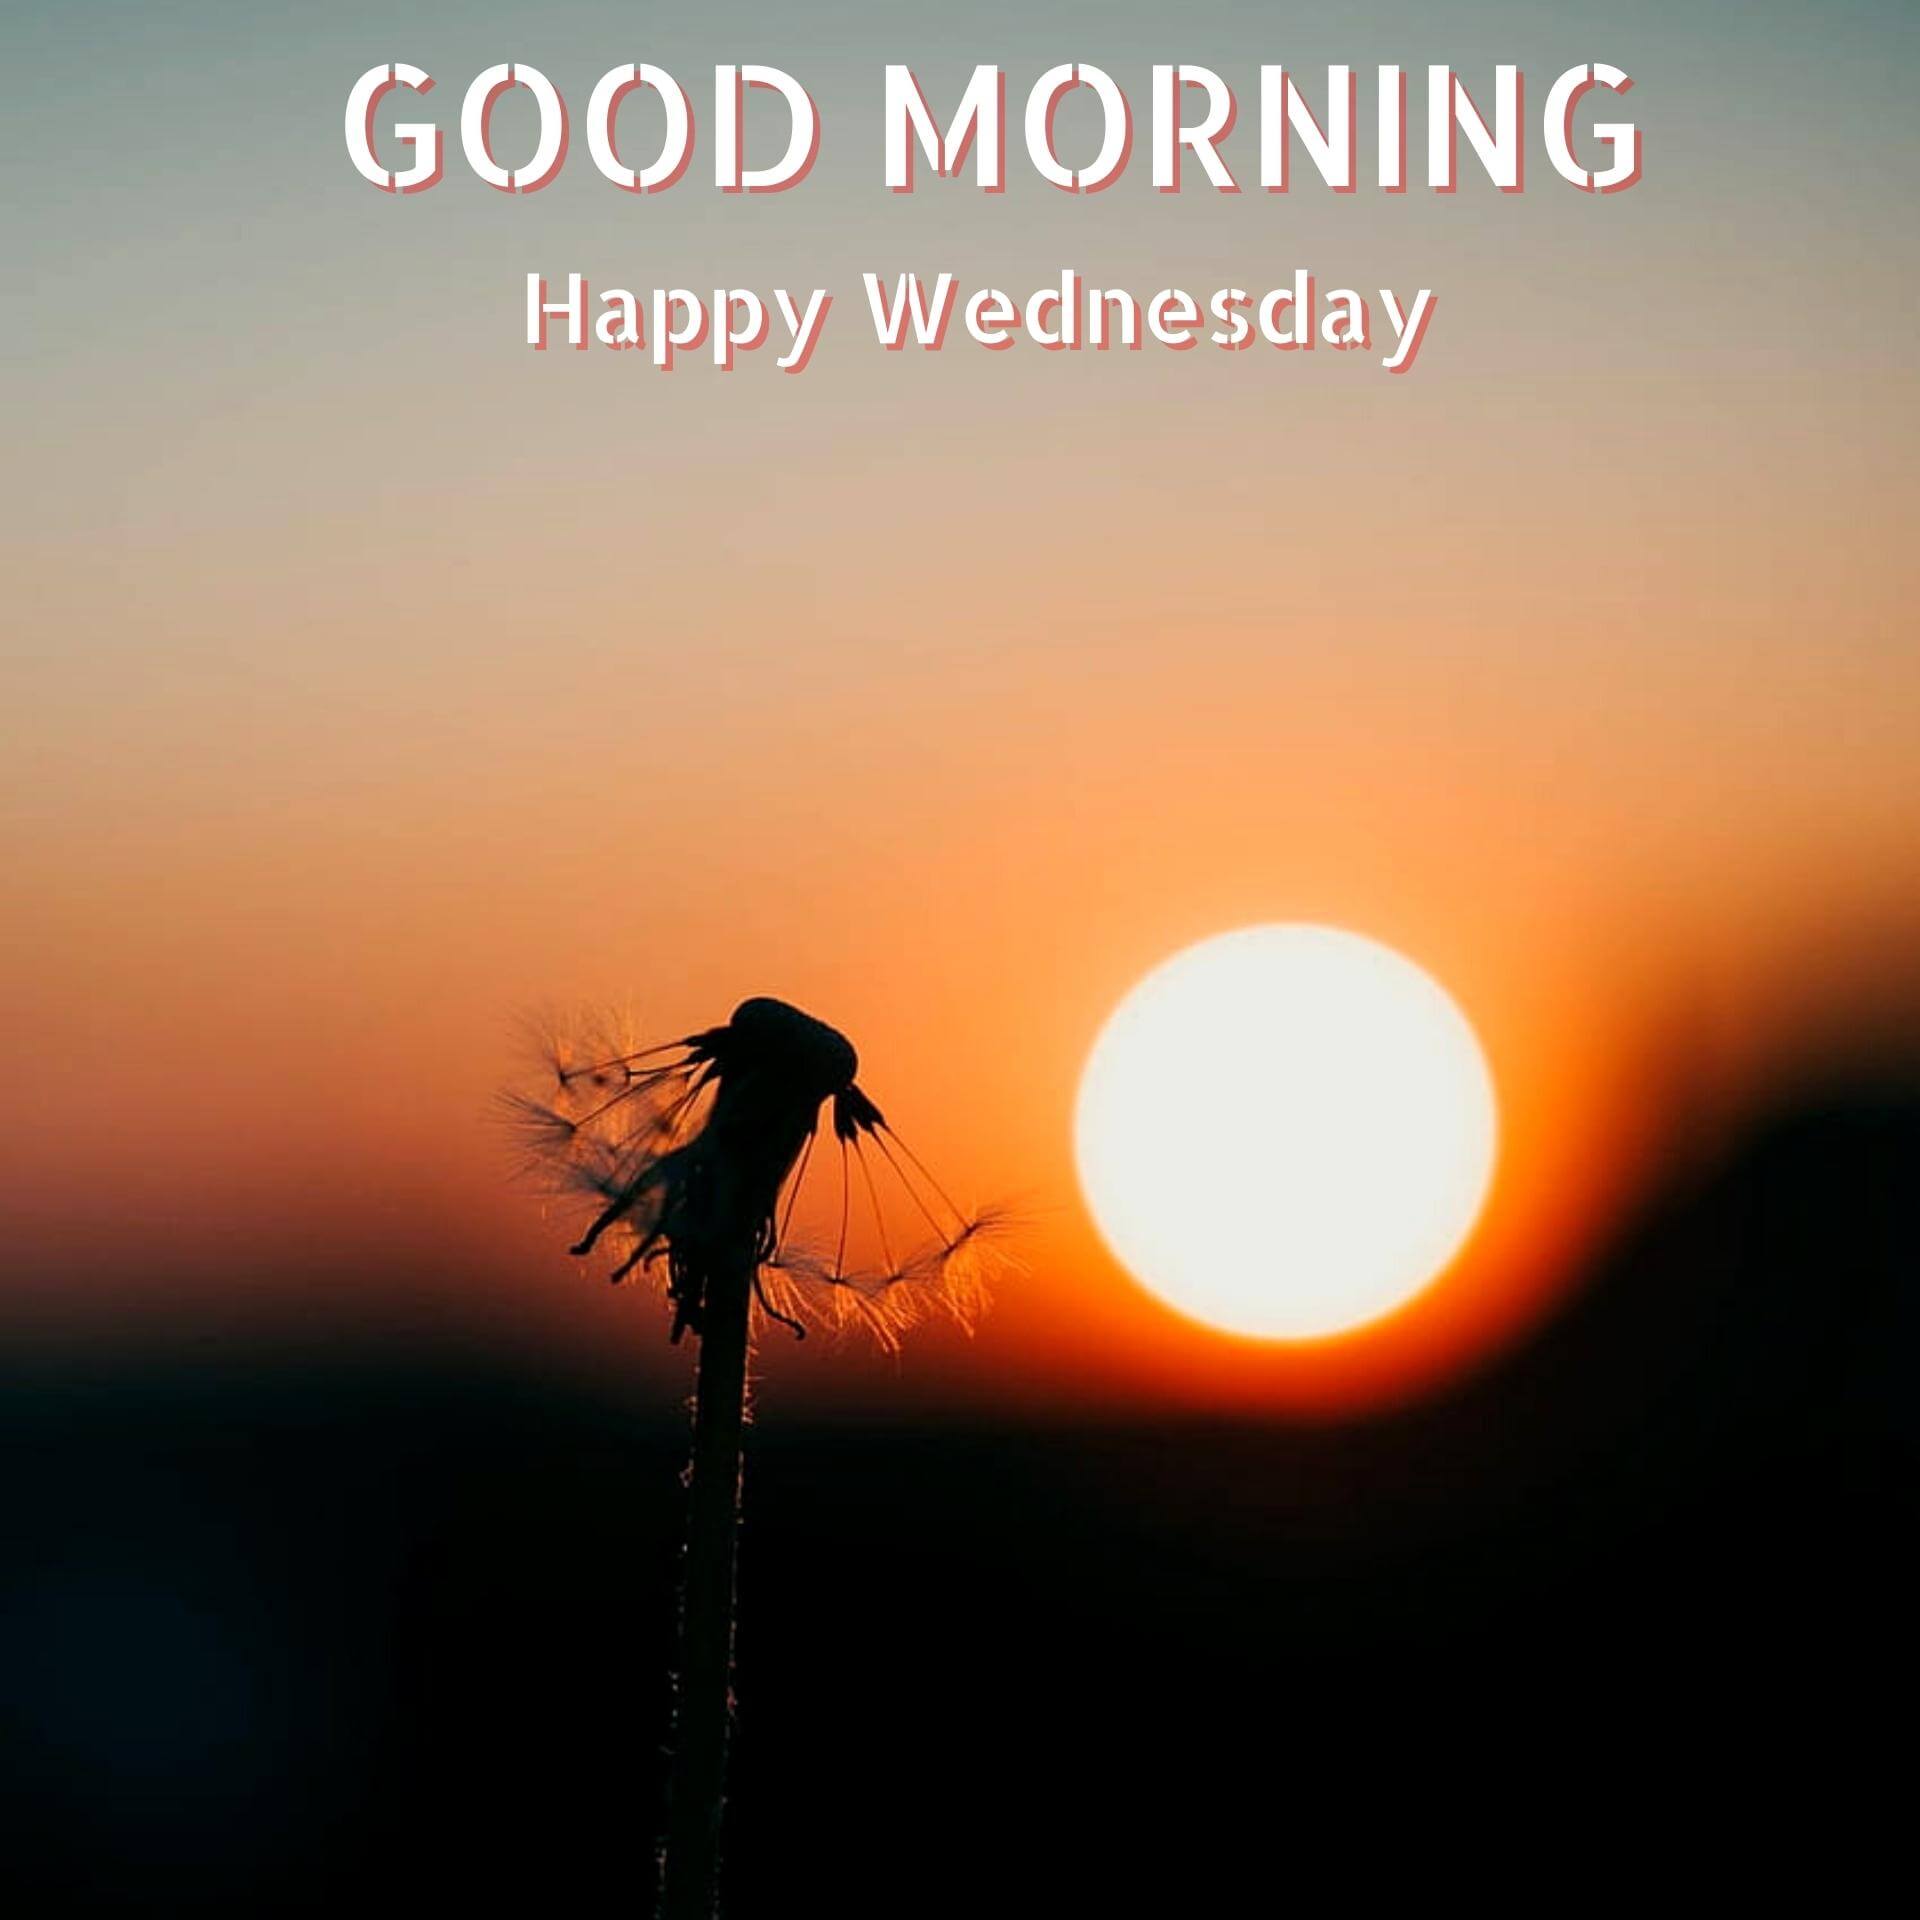 Wednesday good morning Pics Wallpaper With Sunrise 2